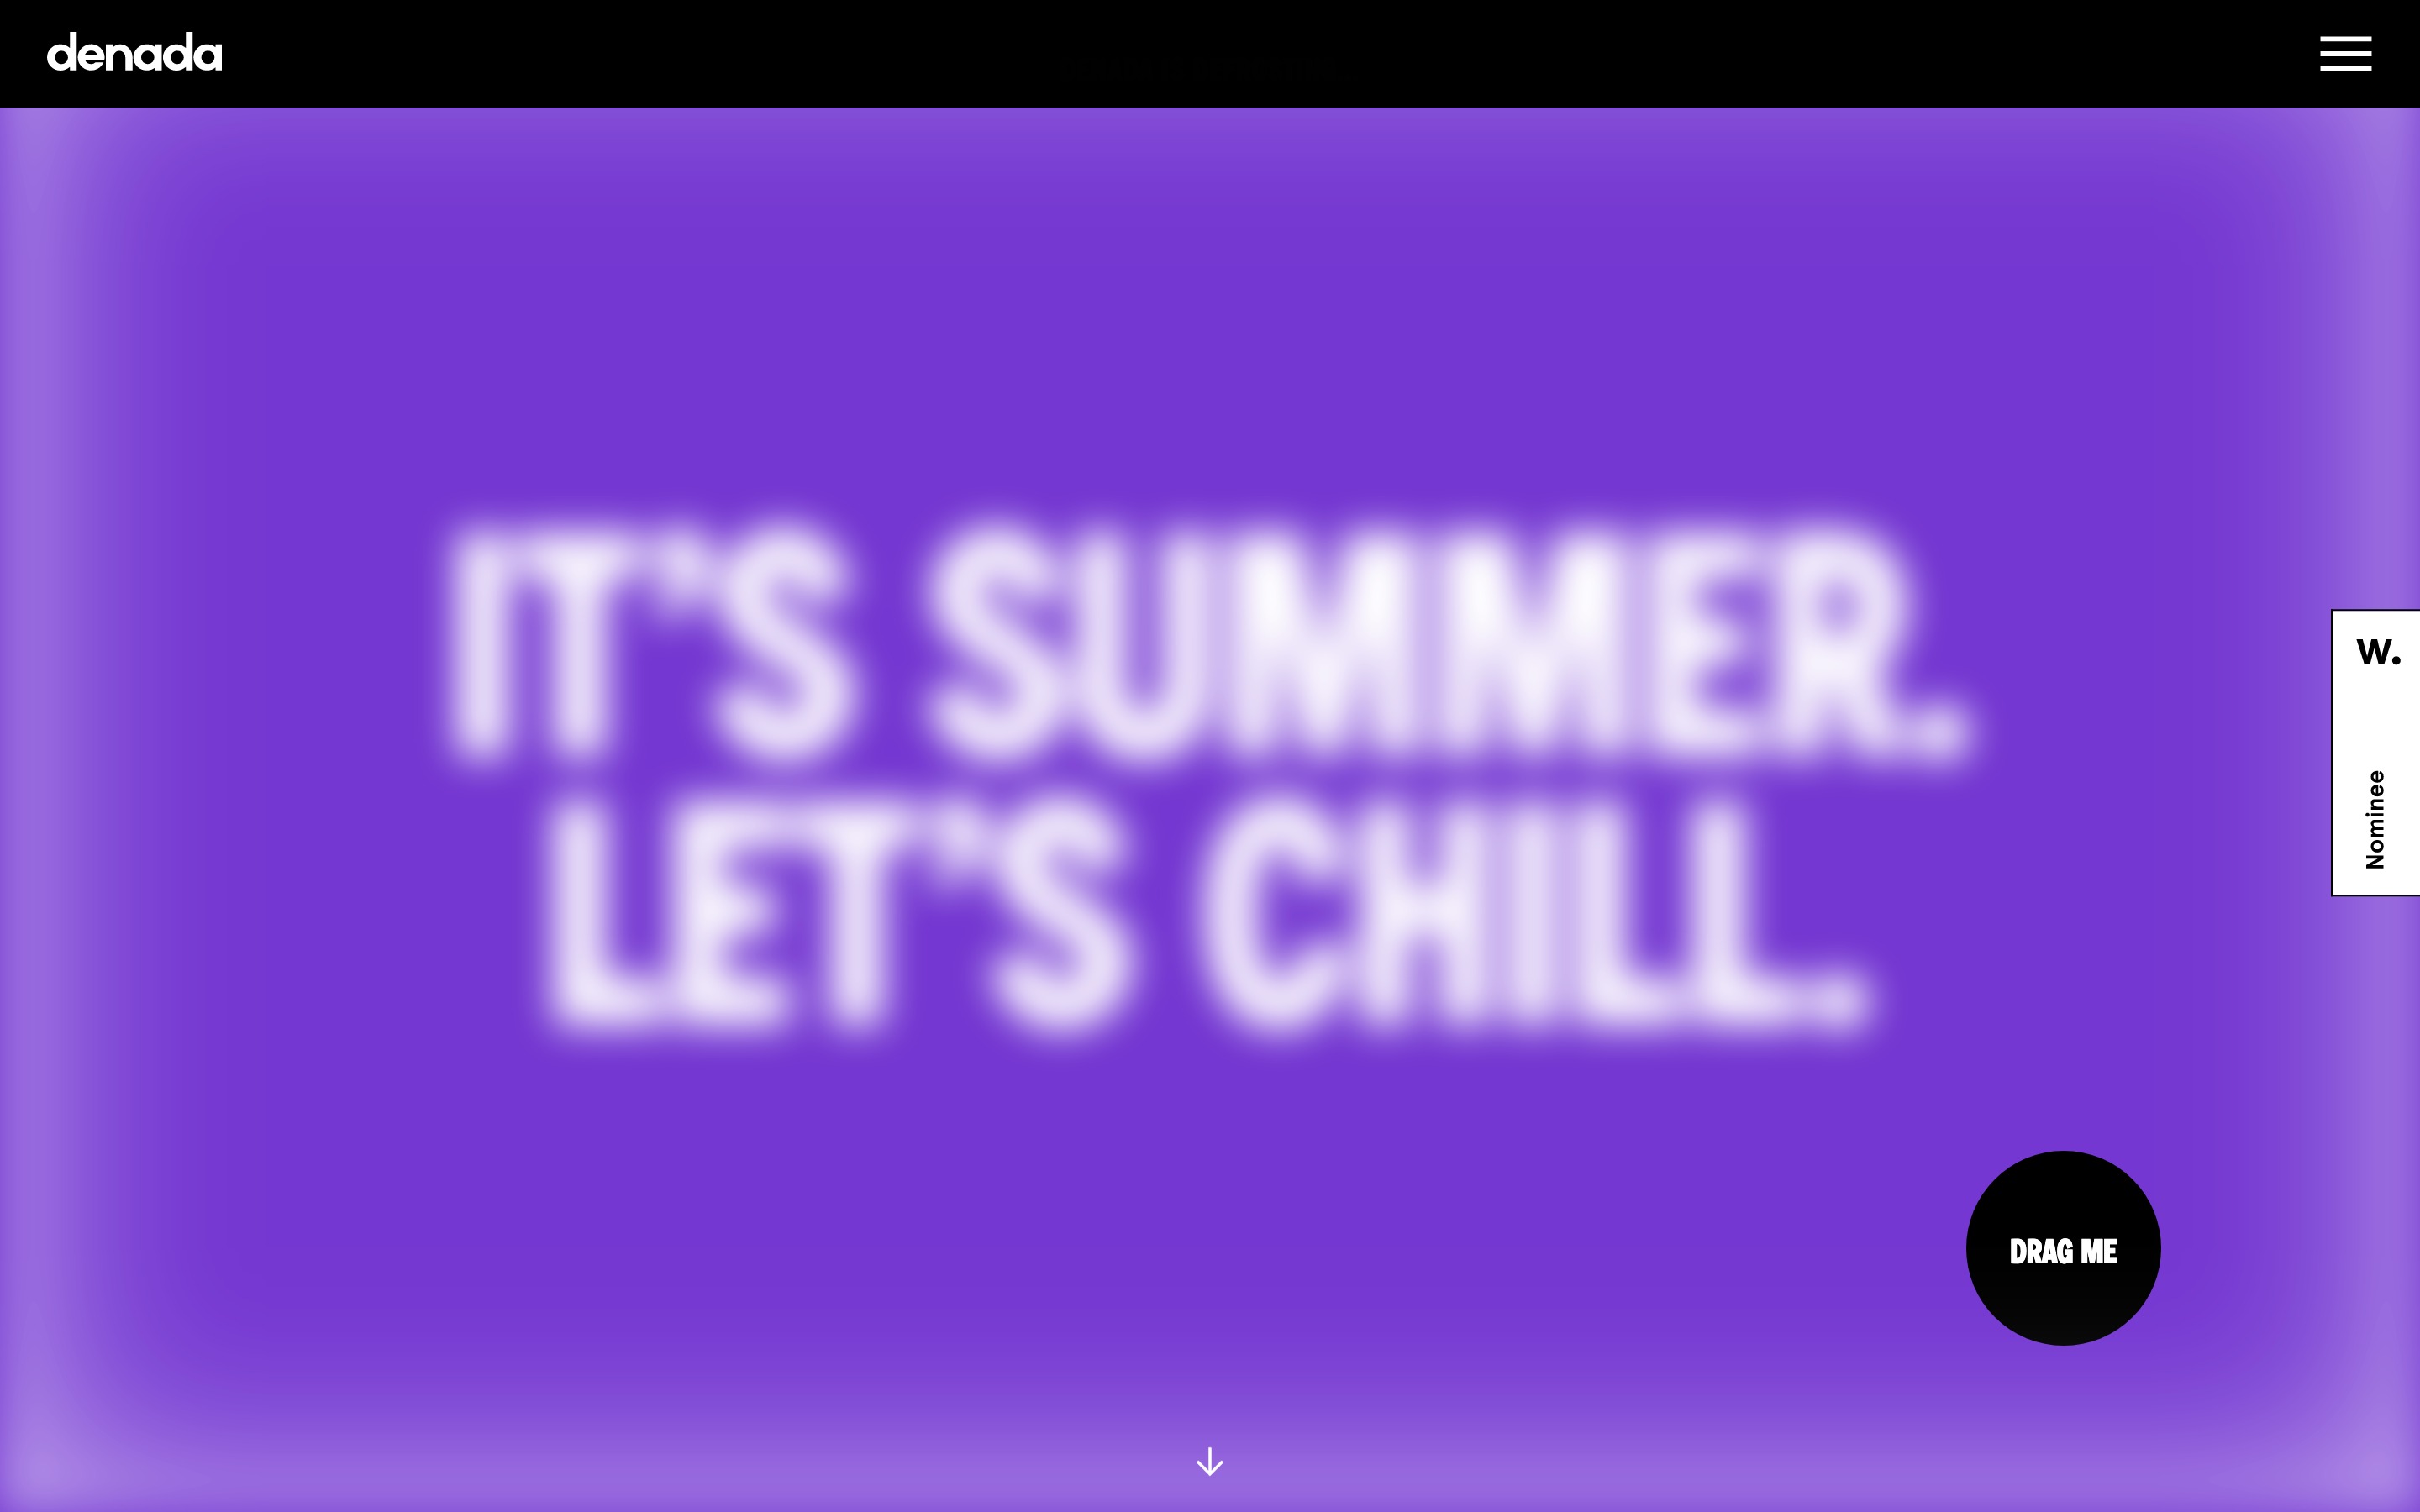 Interactive homepage designin bright purple where users drag through the frosted overlay to reveal the text "its summer lets chill".